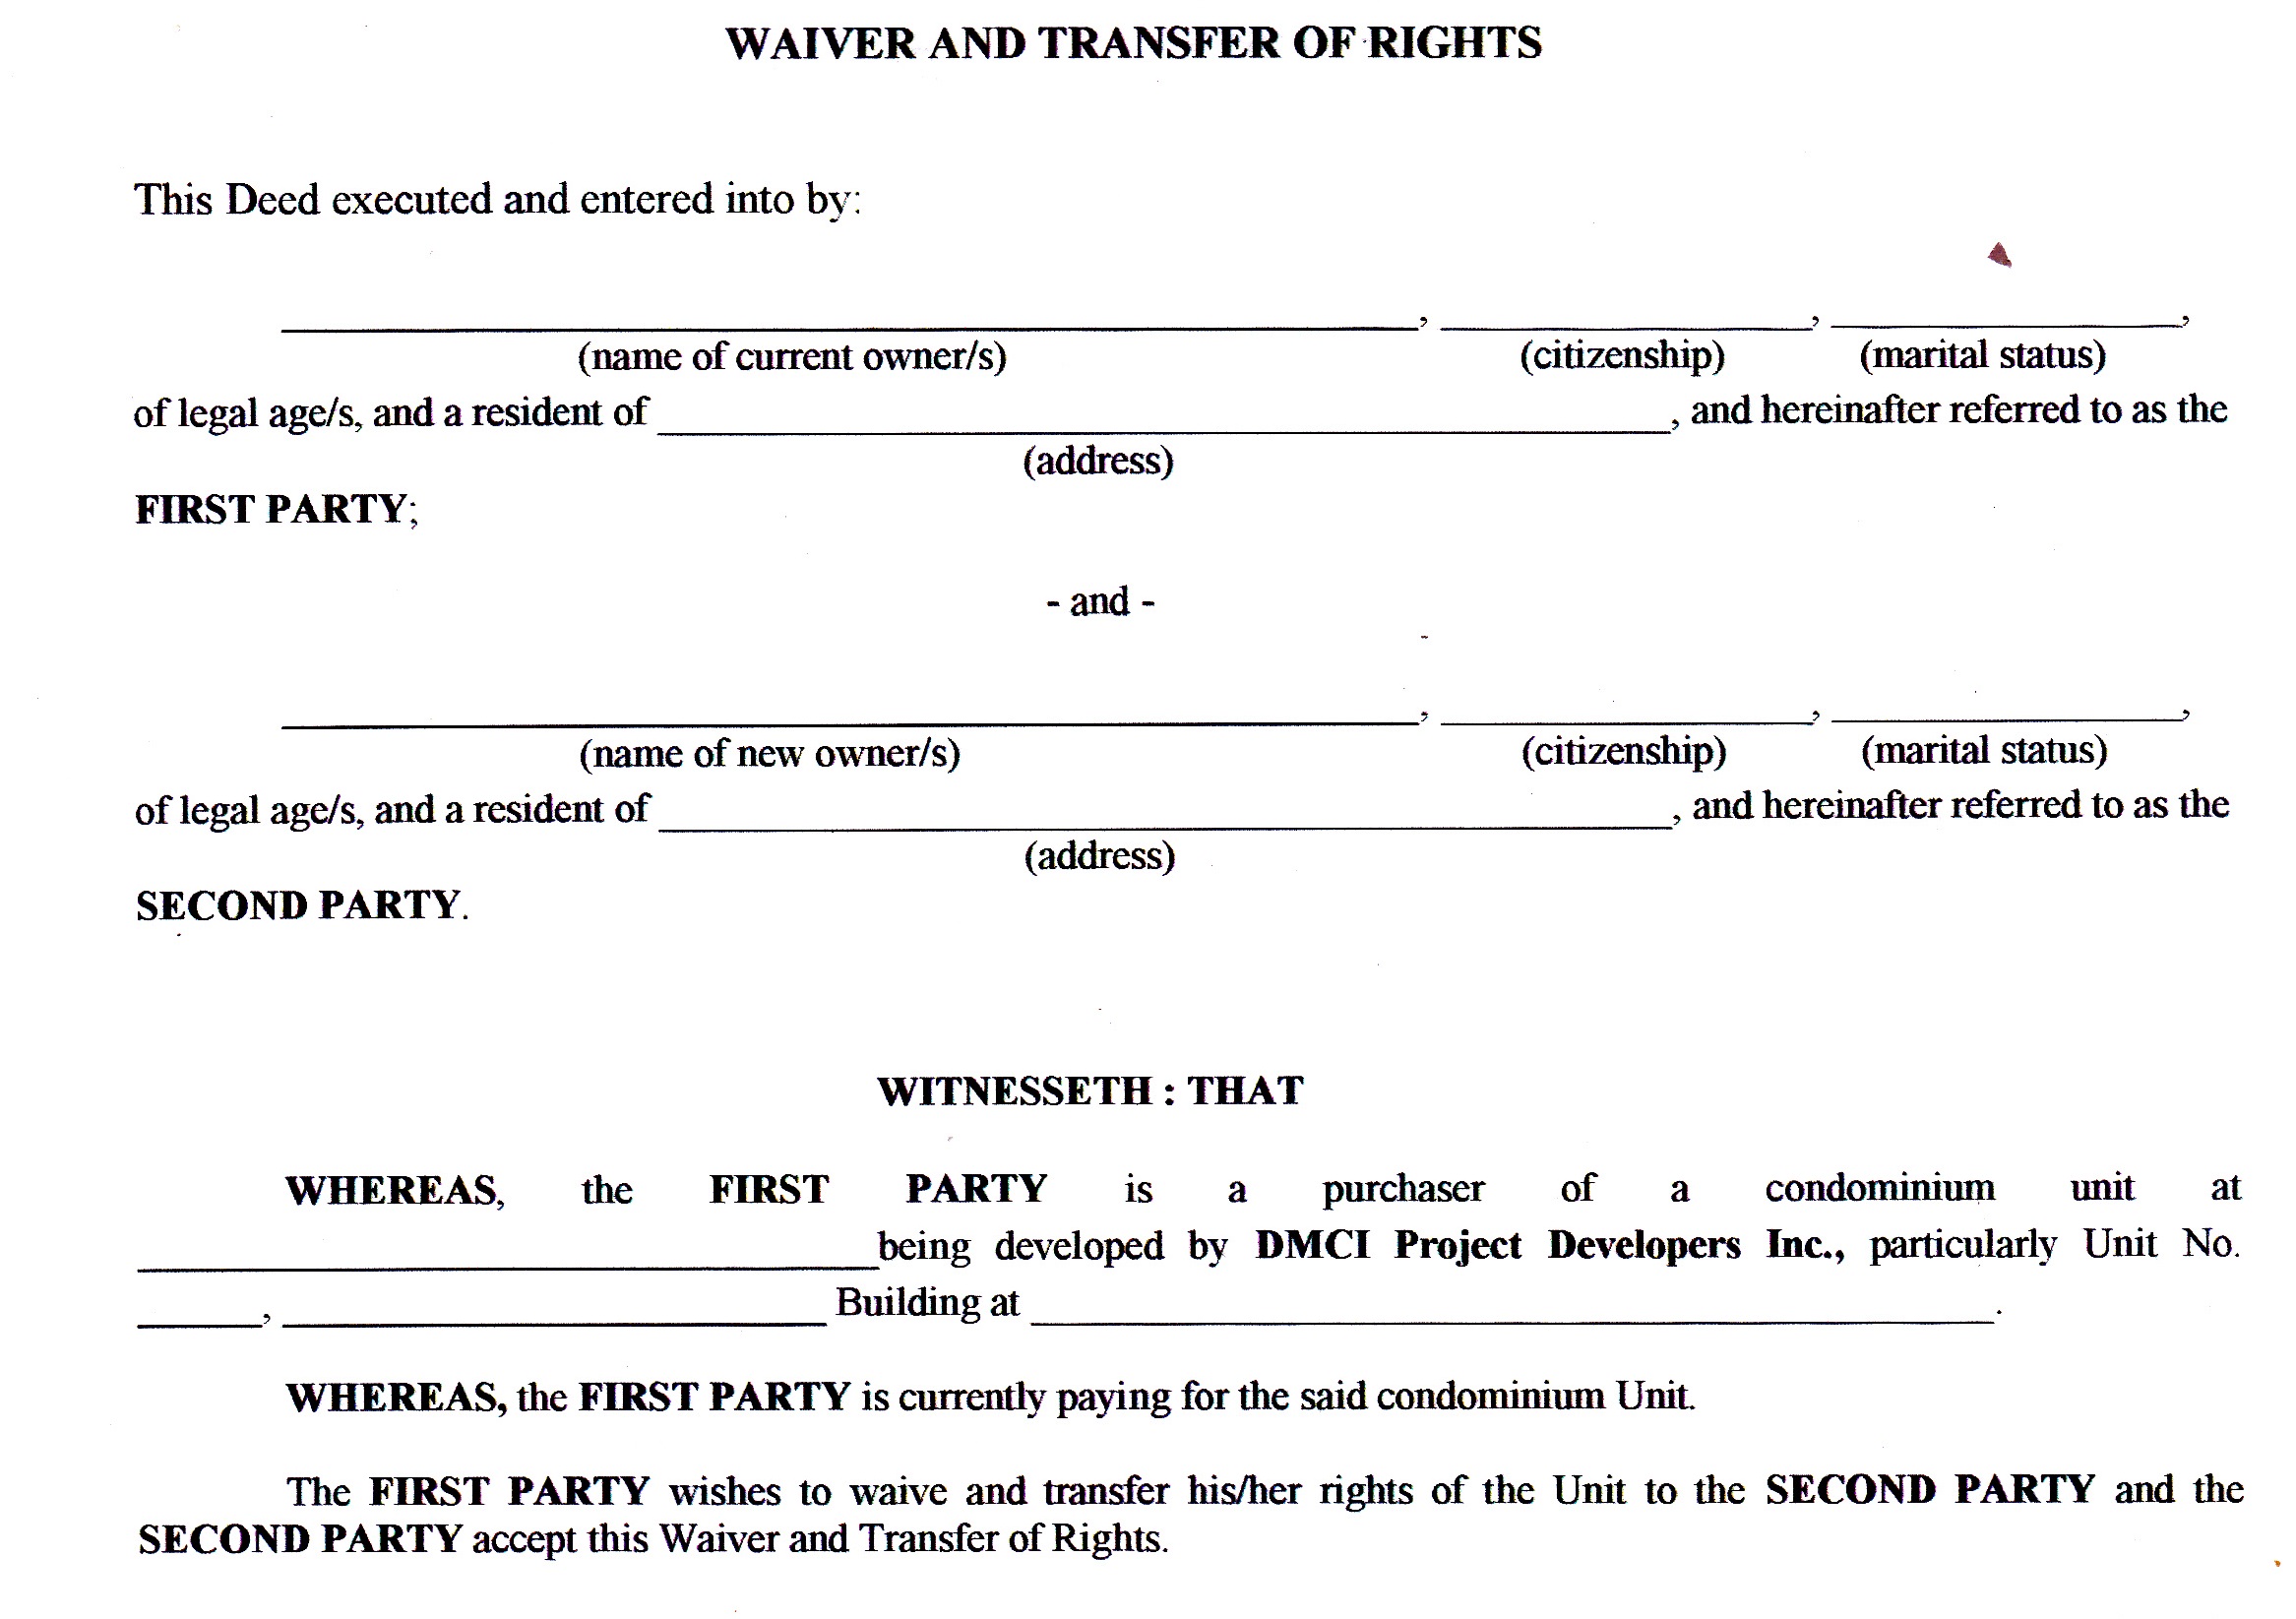 Waiver & Transfer of Rights-pard.jpg